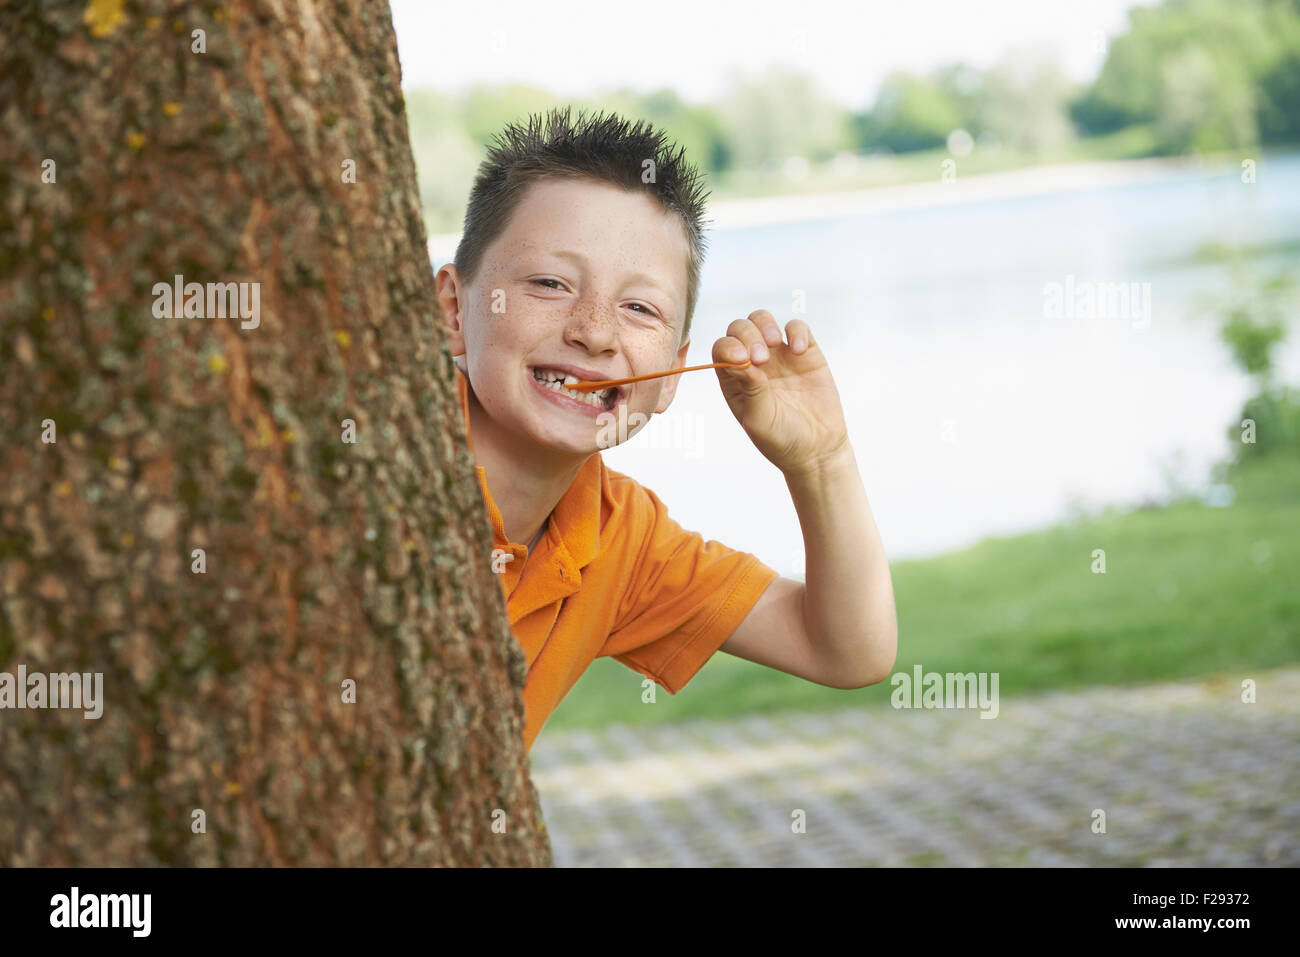 Boy pulling bubble gum and peeking out from behind a tree, Bavaria, Germany Stock Photo